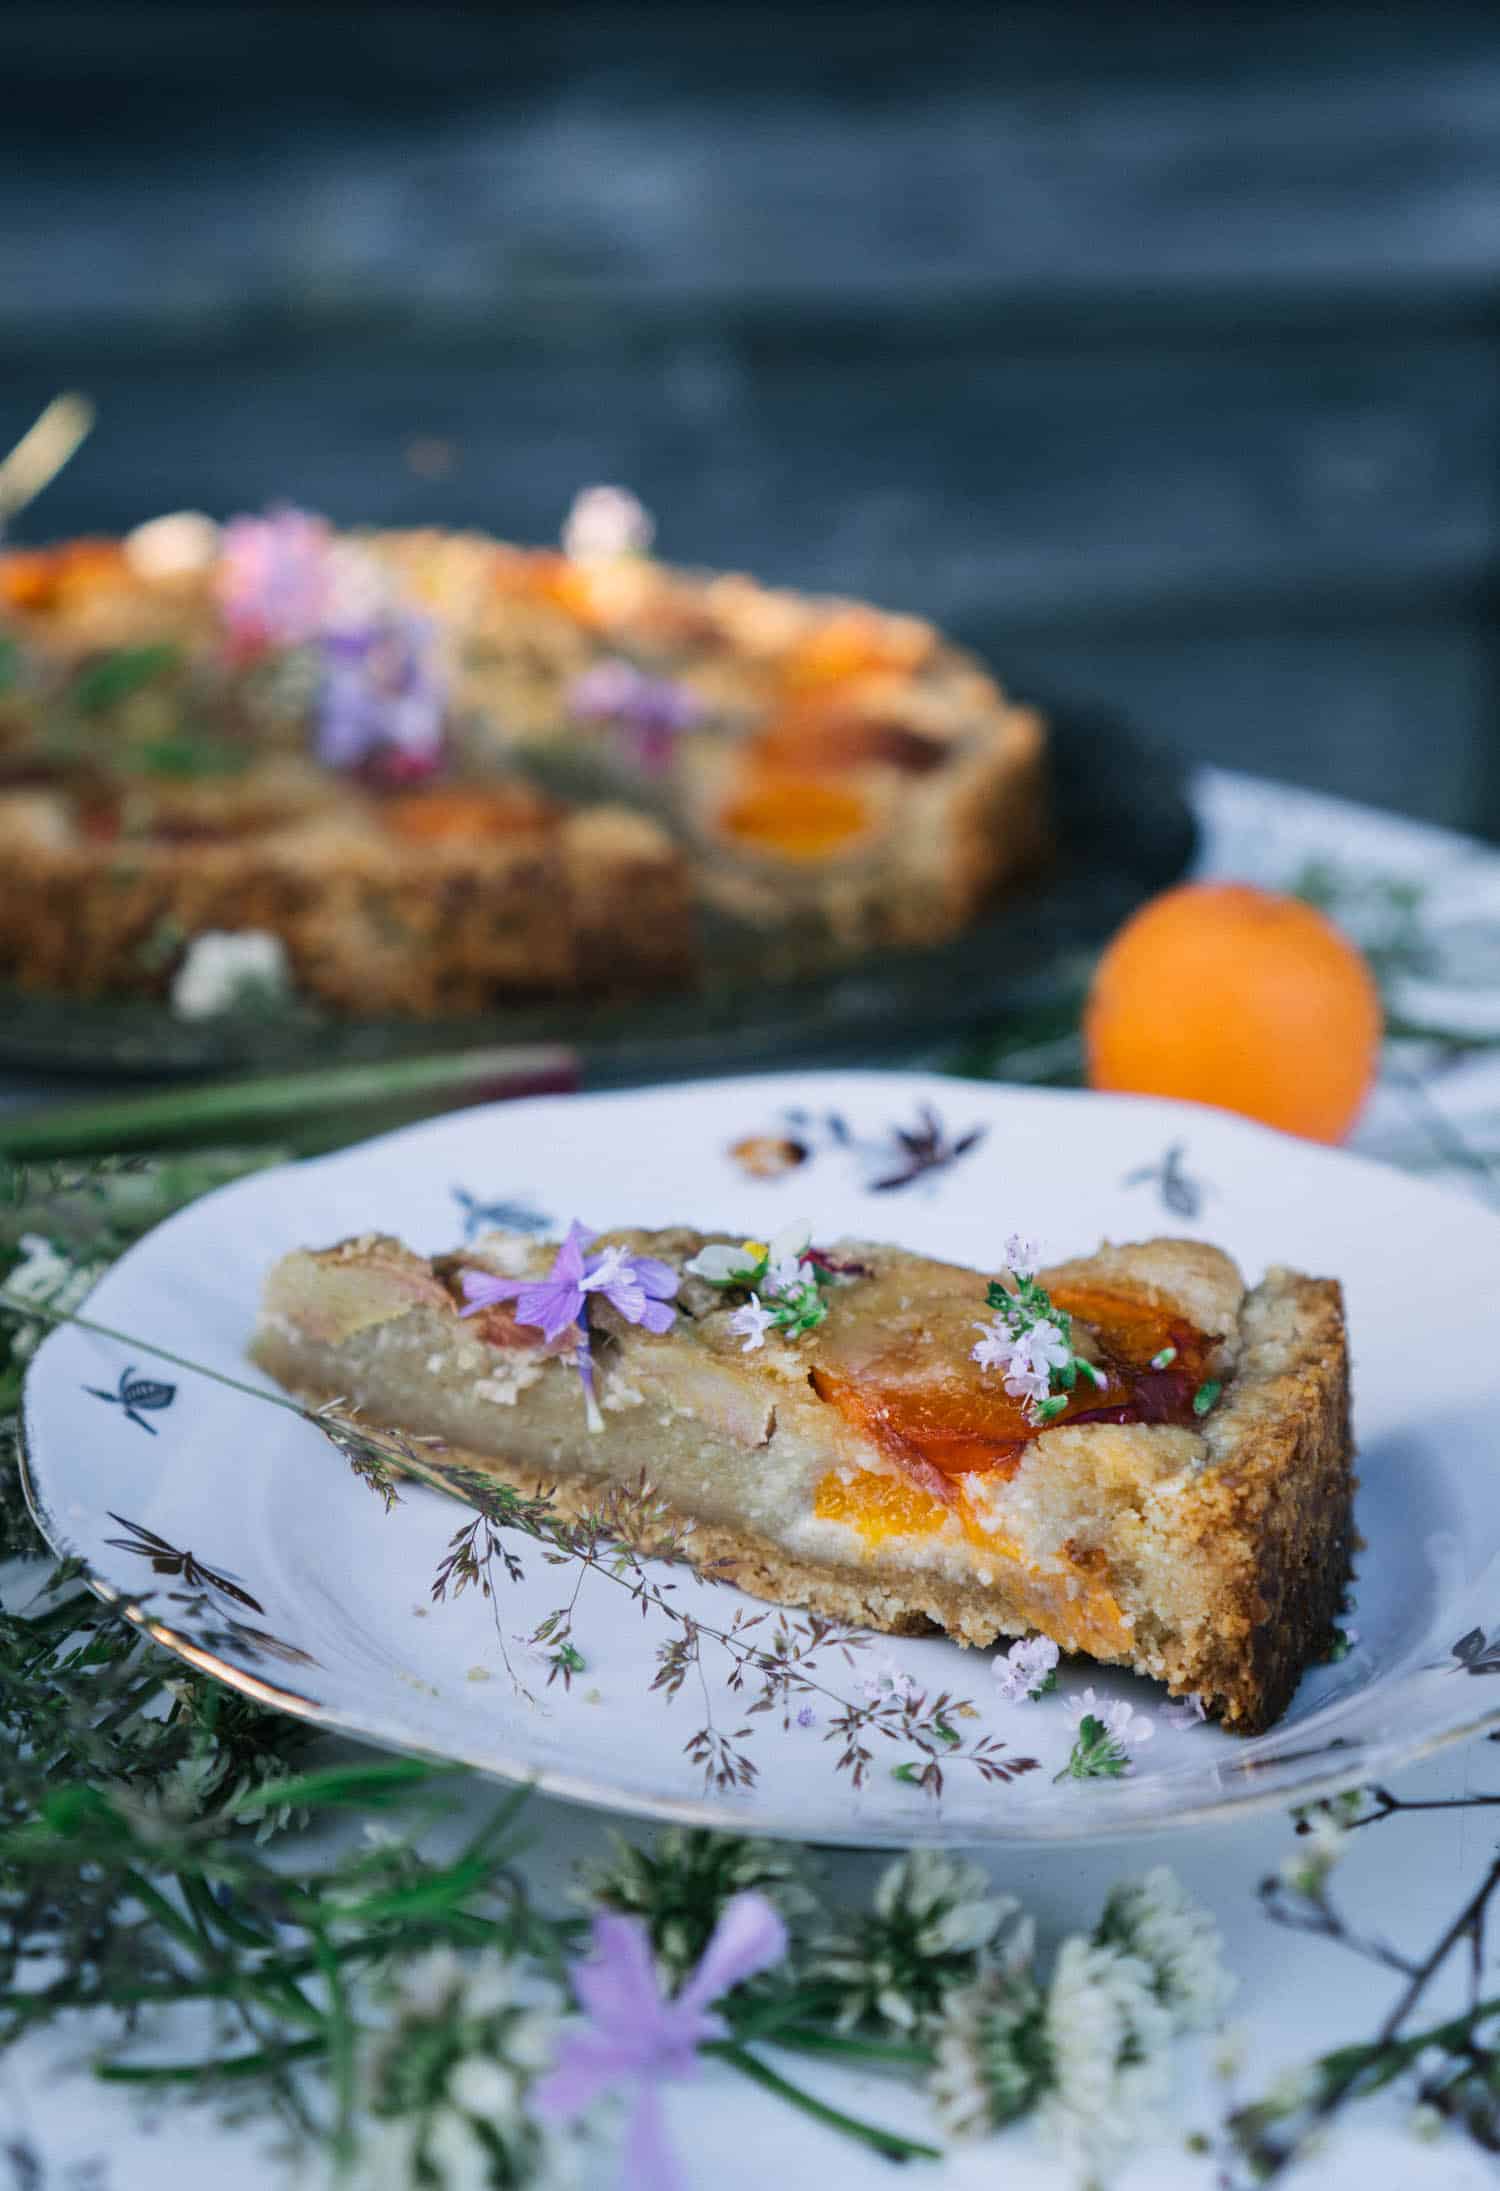 Almond Tart With Rhubarb And Apricots